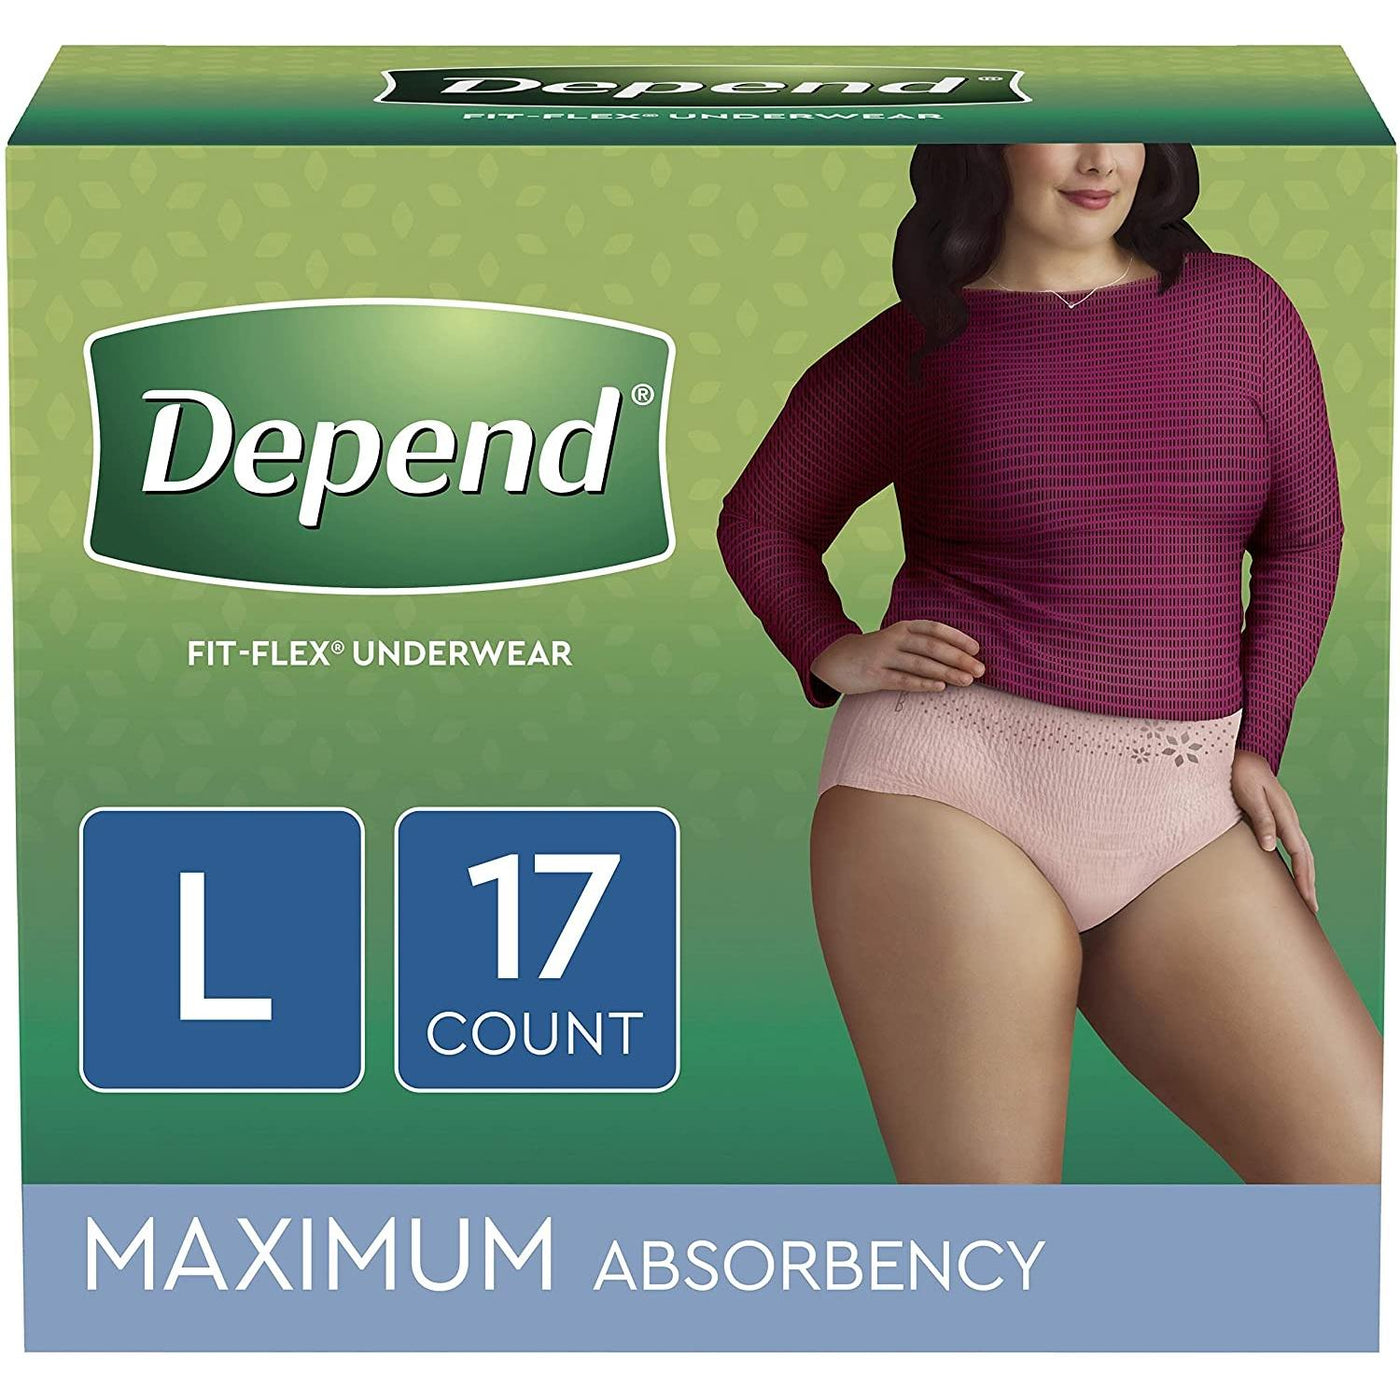 Attends Advanced Disposable Incontinence Underwear Children to Adults –